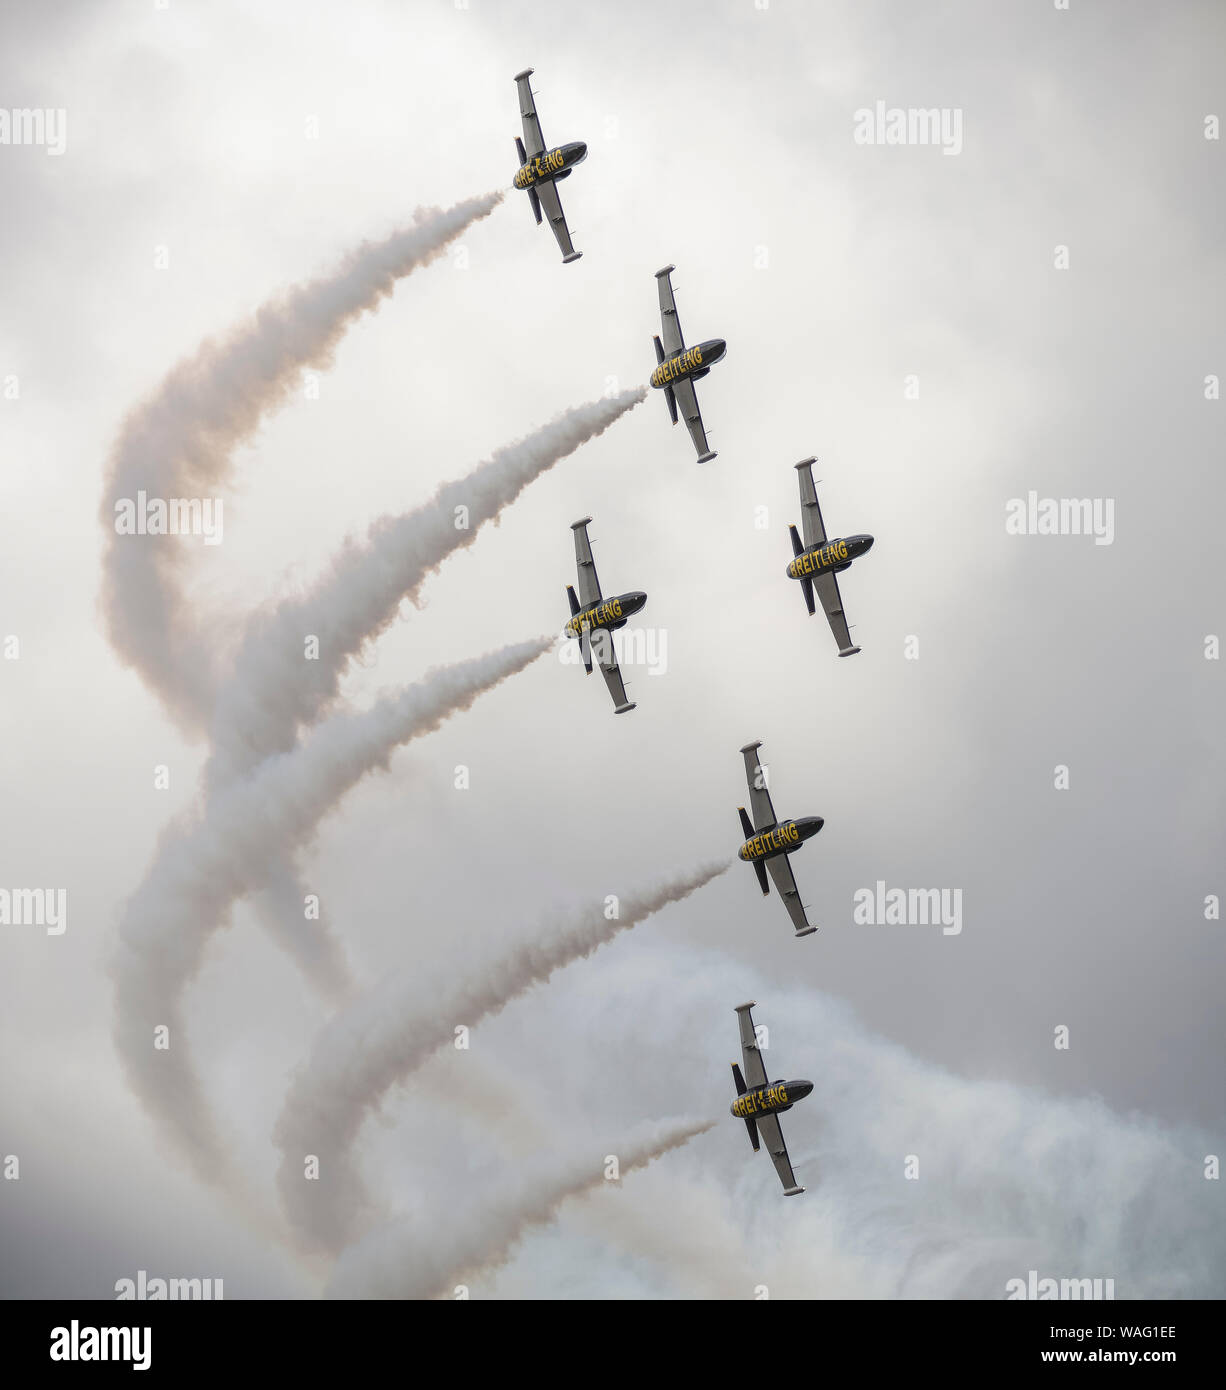 Six Breiling L-39 Albatros jets forming part of the Breitling Aerobatic Jet Team in the sky with white smoke trails forming a manoeuvre Stock Photo